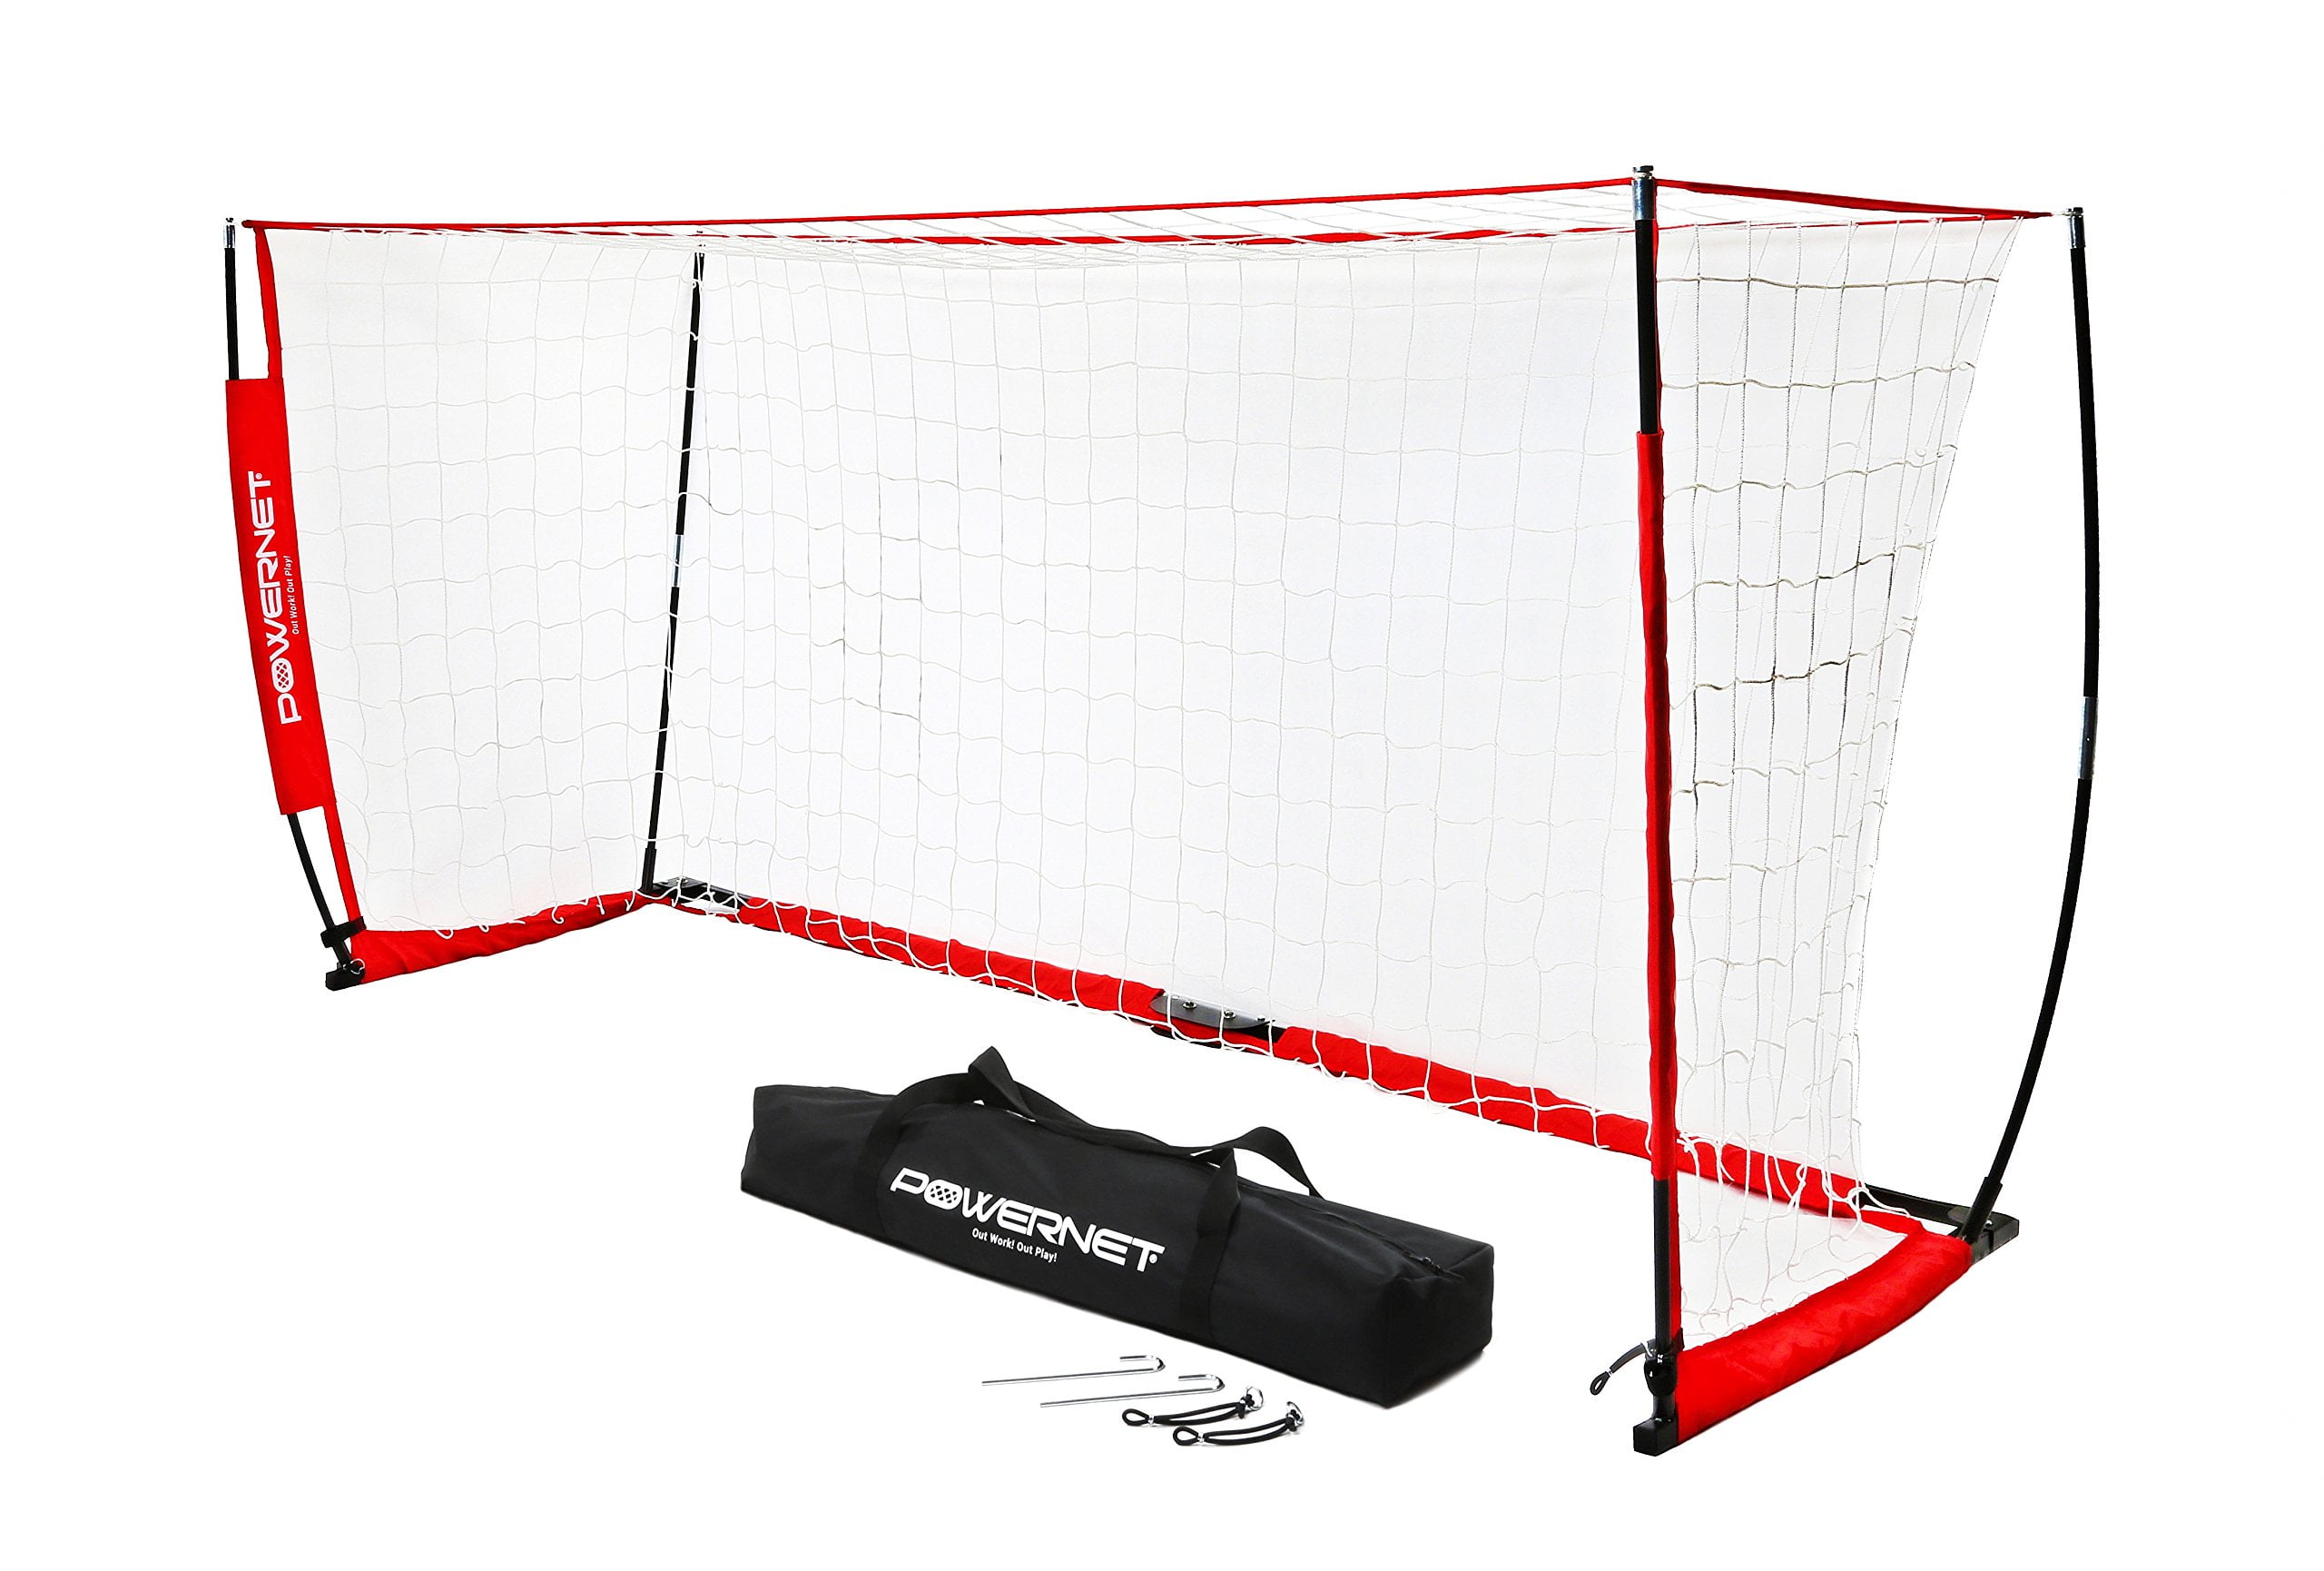 Ancheer 12 x 6 ft Soccer Goal Portable Bow Style Net Perfect For Soccer Durable 